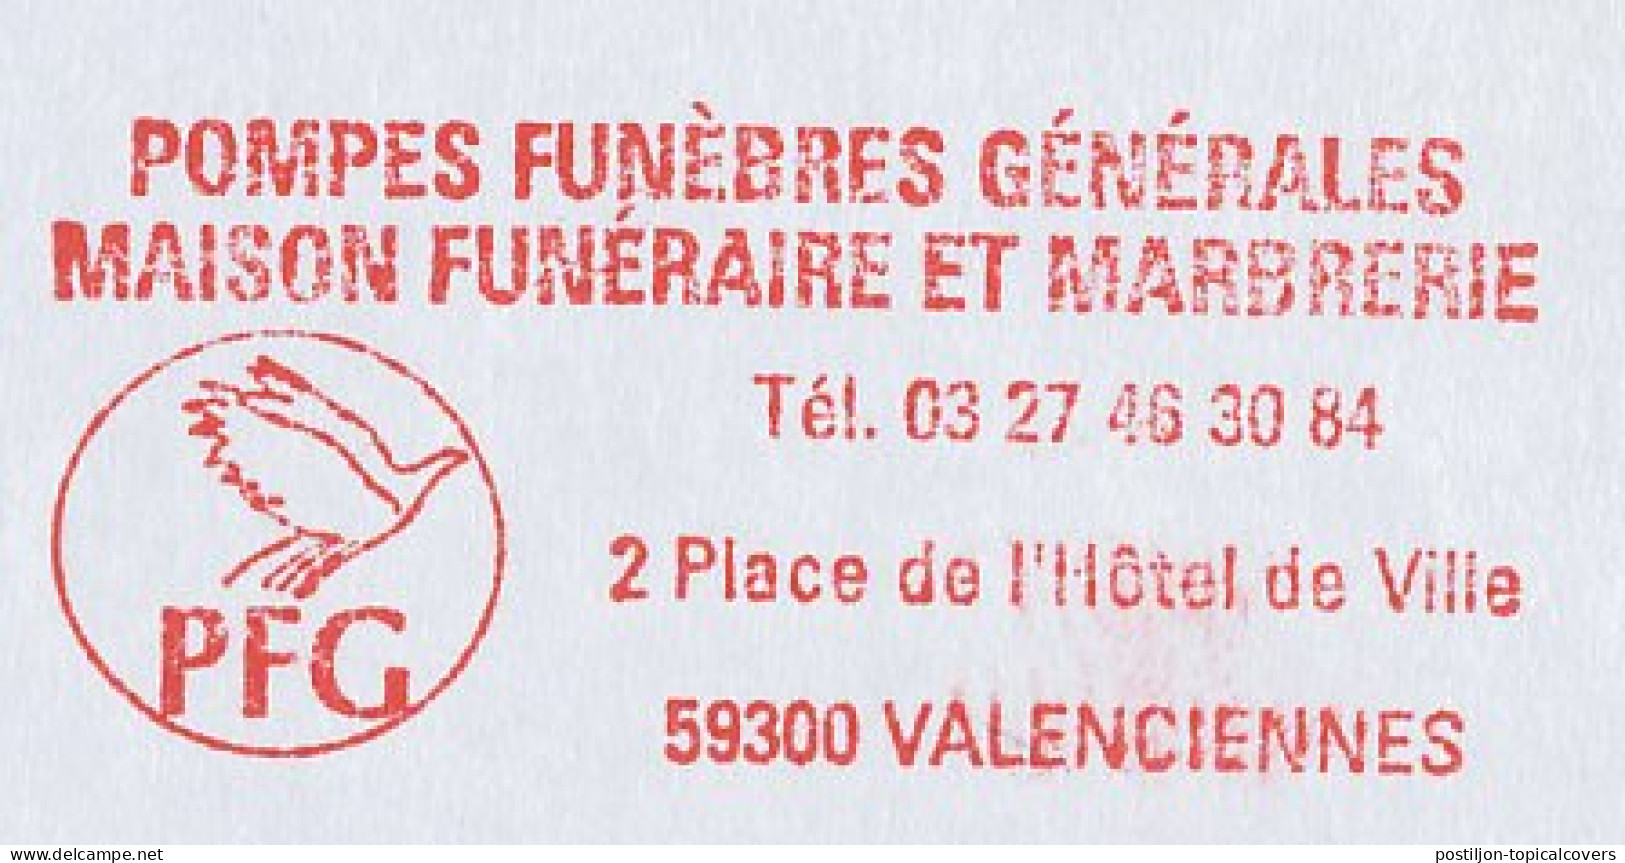 Meter Cover France 2002 Funeral Director  - Unclassified